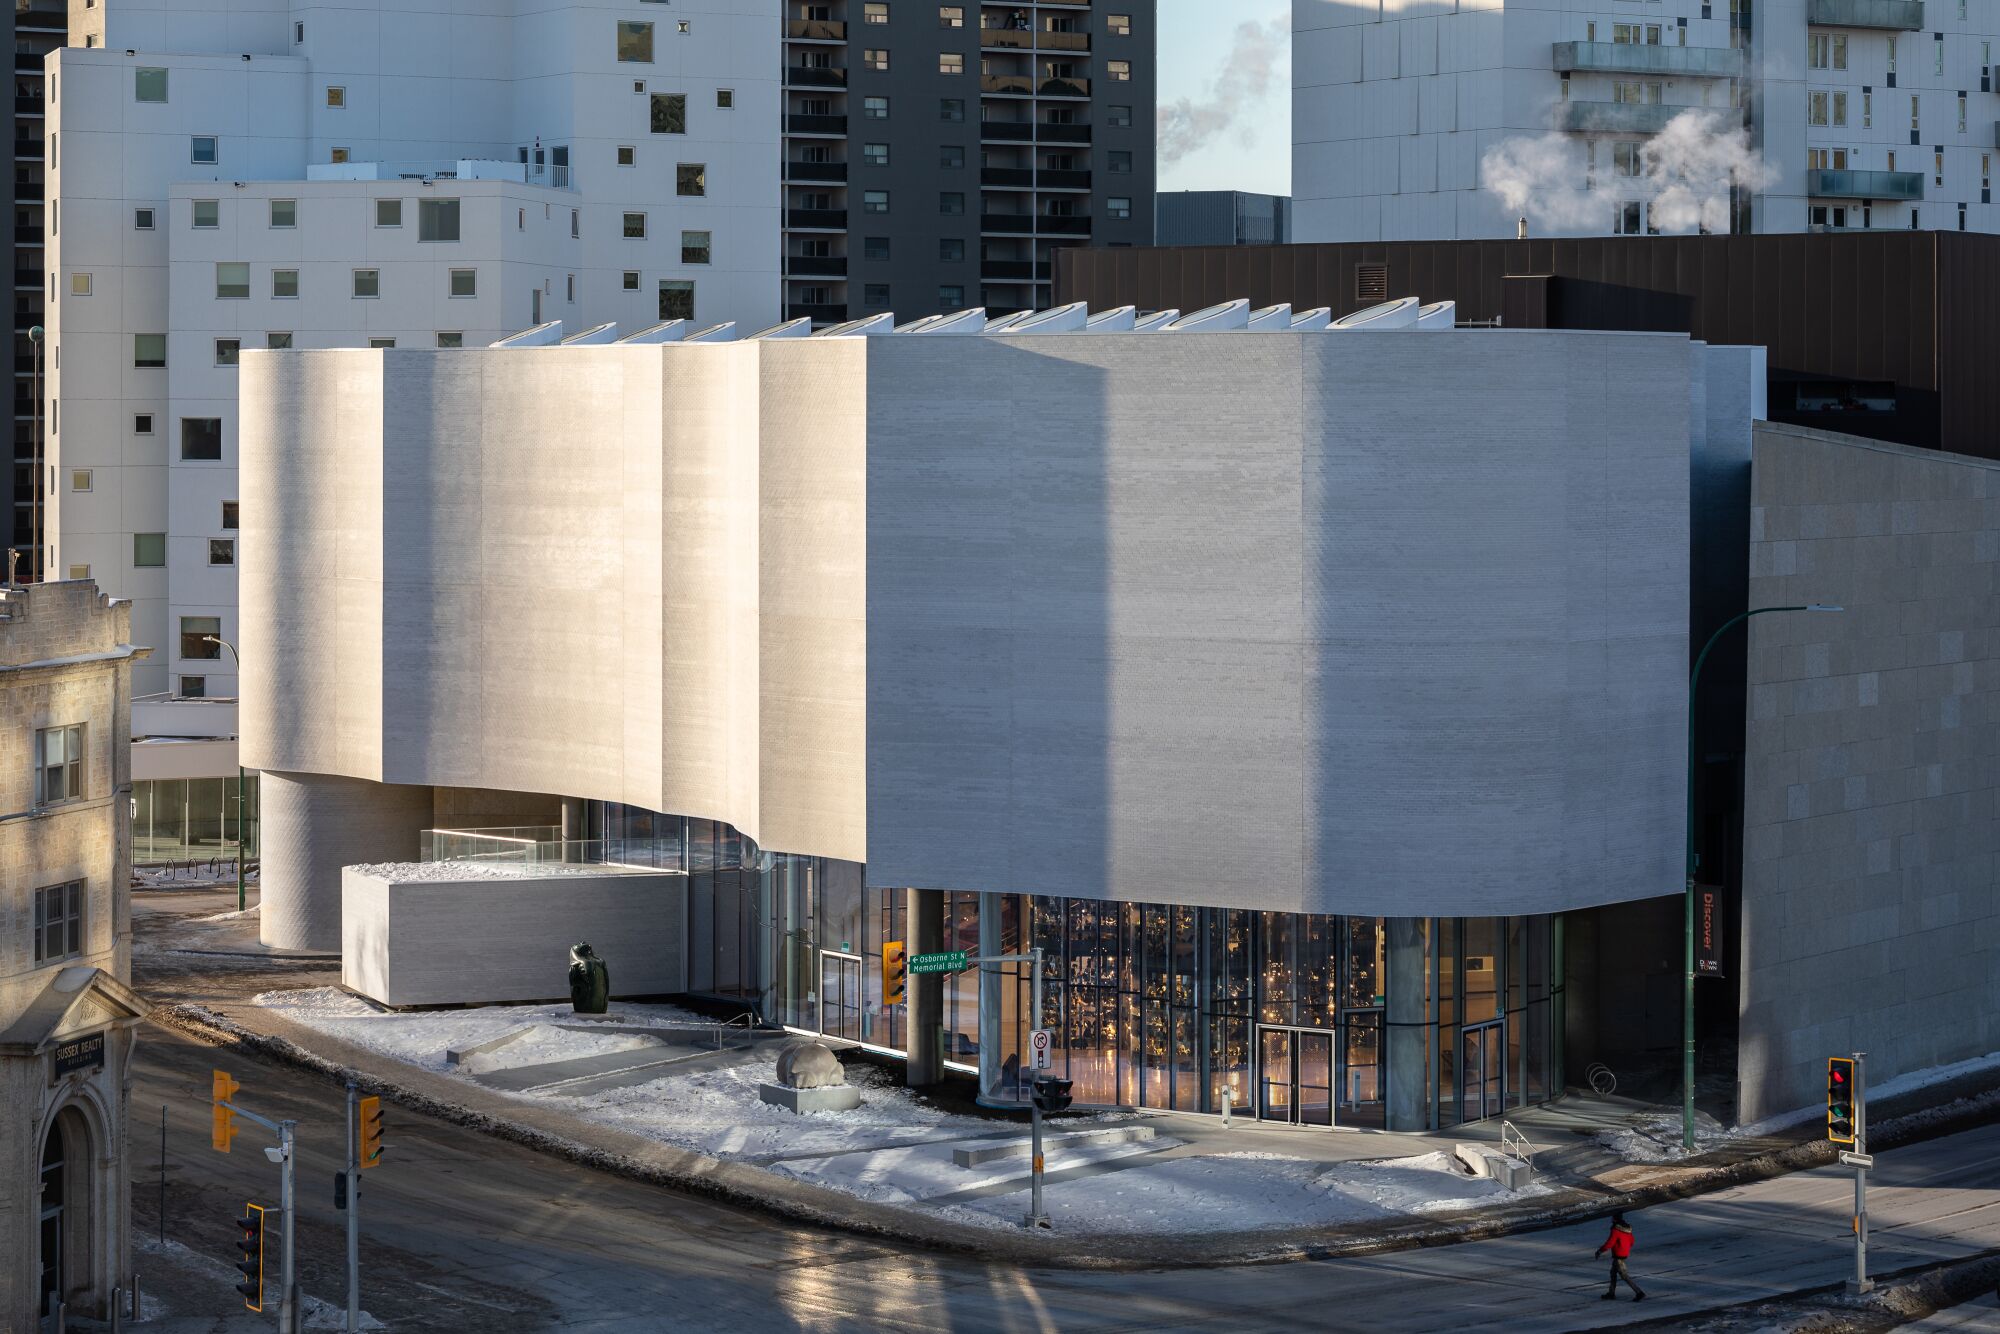 Afternoon light reflects off the rippling white facade of Qaumajuq, an important center for Inuit art